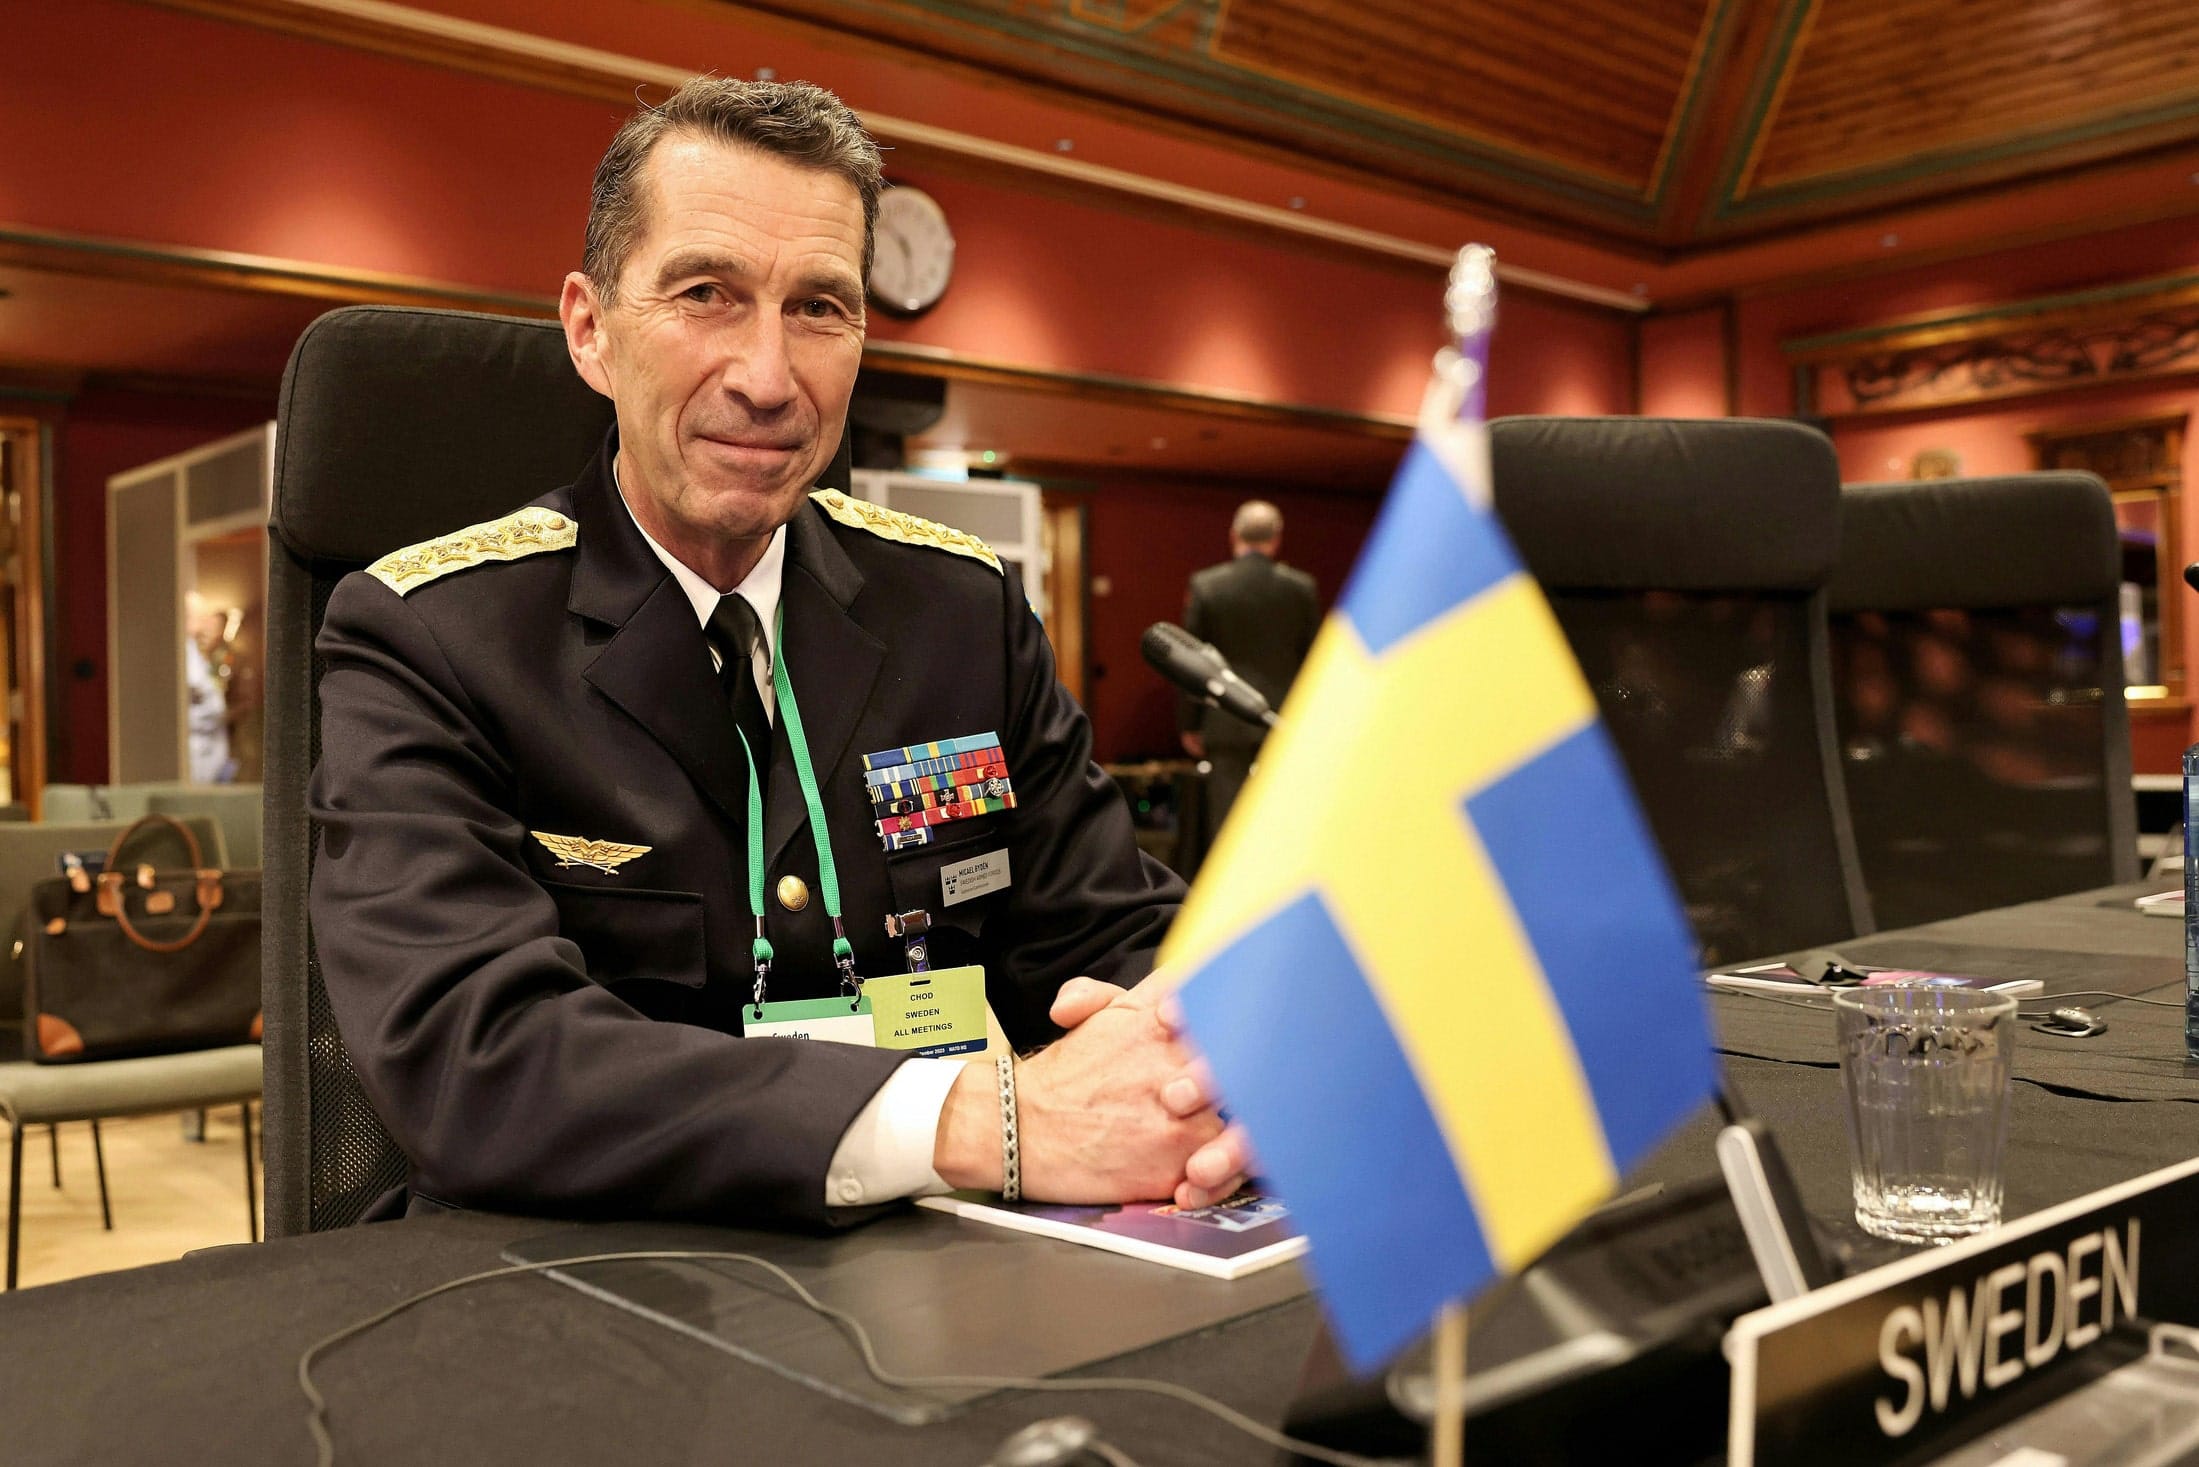 General Micael Bydén, Sweden’s Chief of Defence, with his hands on a brown table with a Swedish flag in front of him and a plaque that says “Sweden”